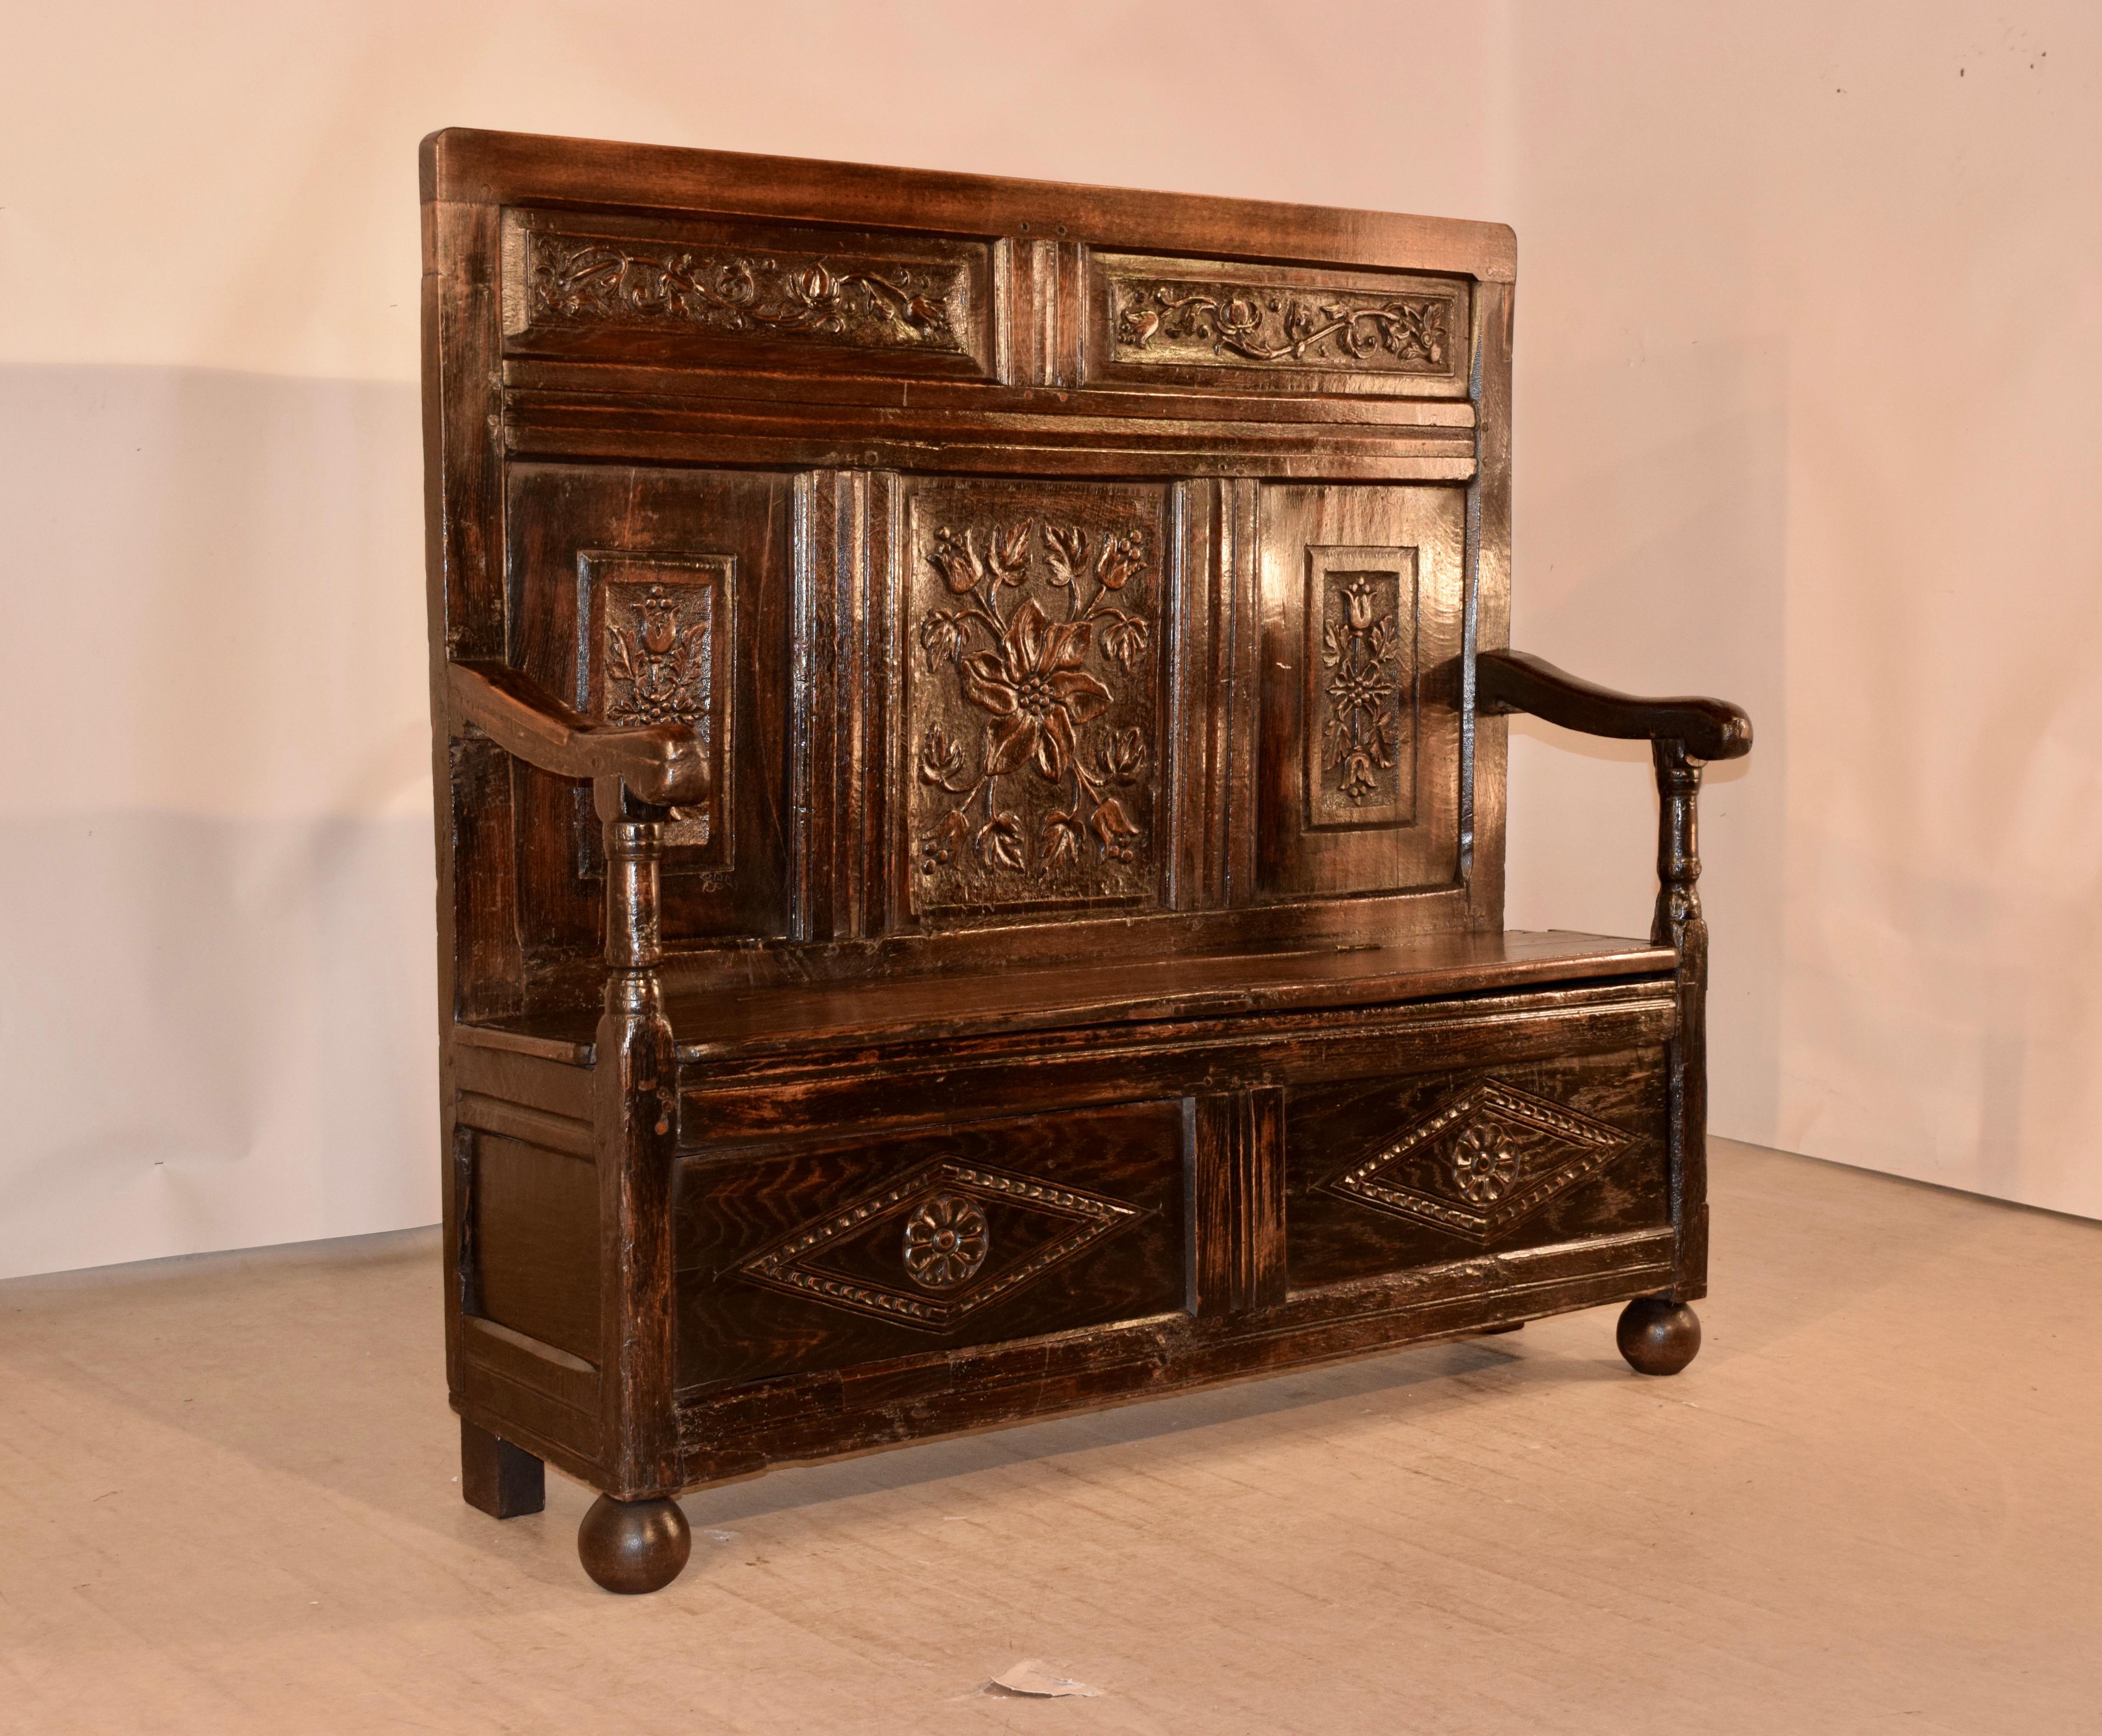 Early 18th century oak settle from England with a paneled back which has hand carved floral decorations in each panel. The seat measures 19.5 inches in height and lifts to reveal storage. The base is paneled on the sides and front, and the front